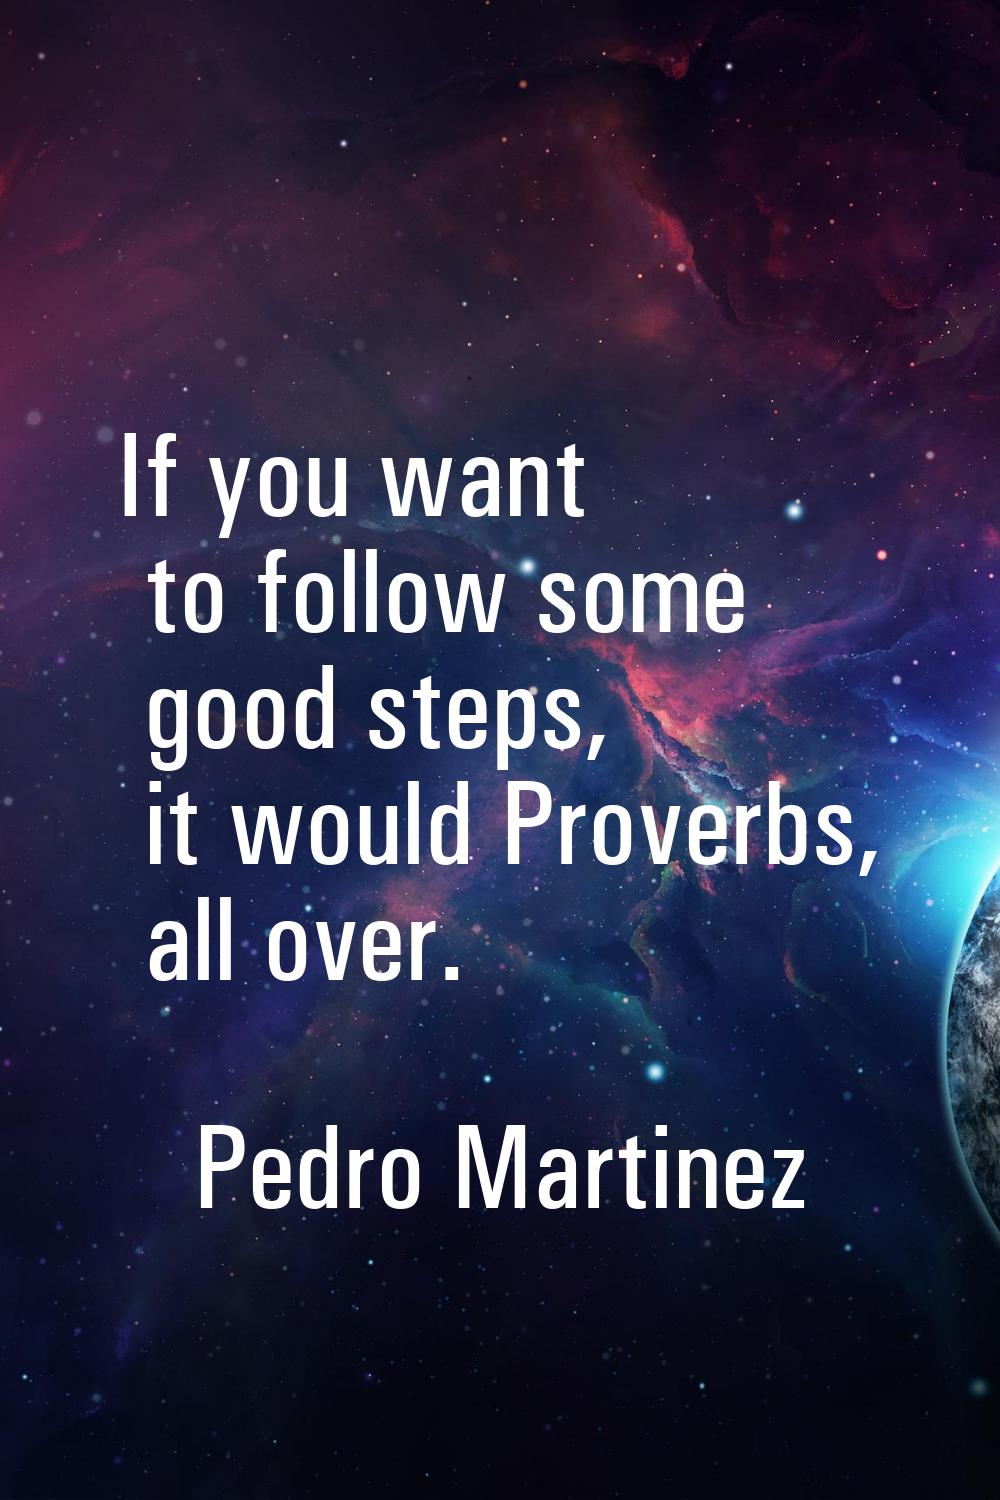 If you want to follow some good steps, it would Proverbs, all over.